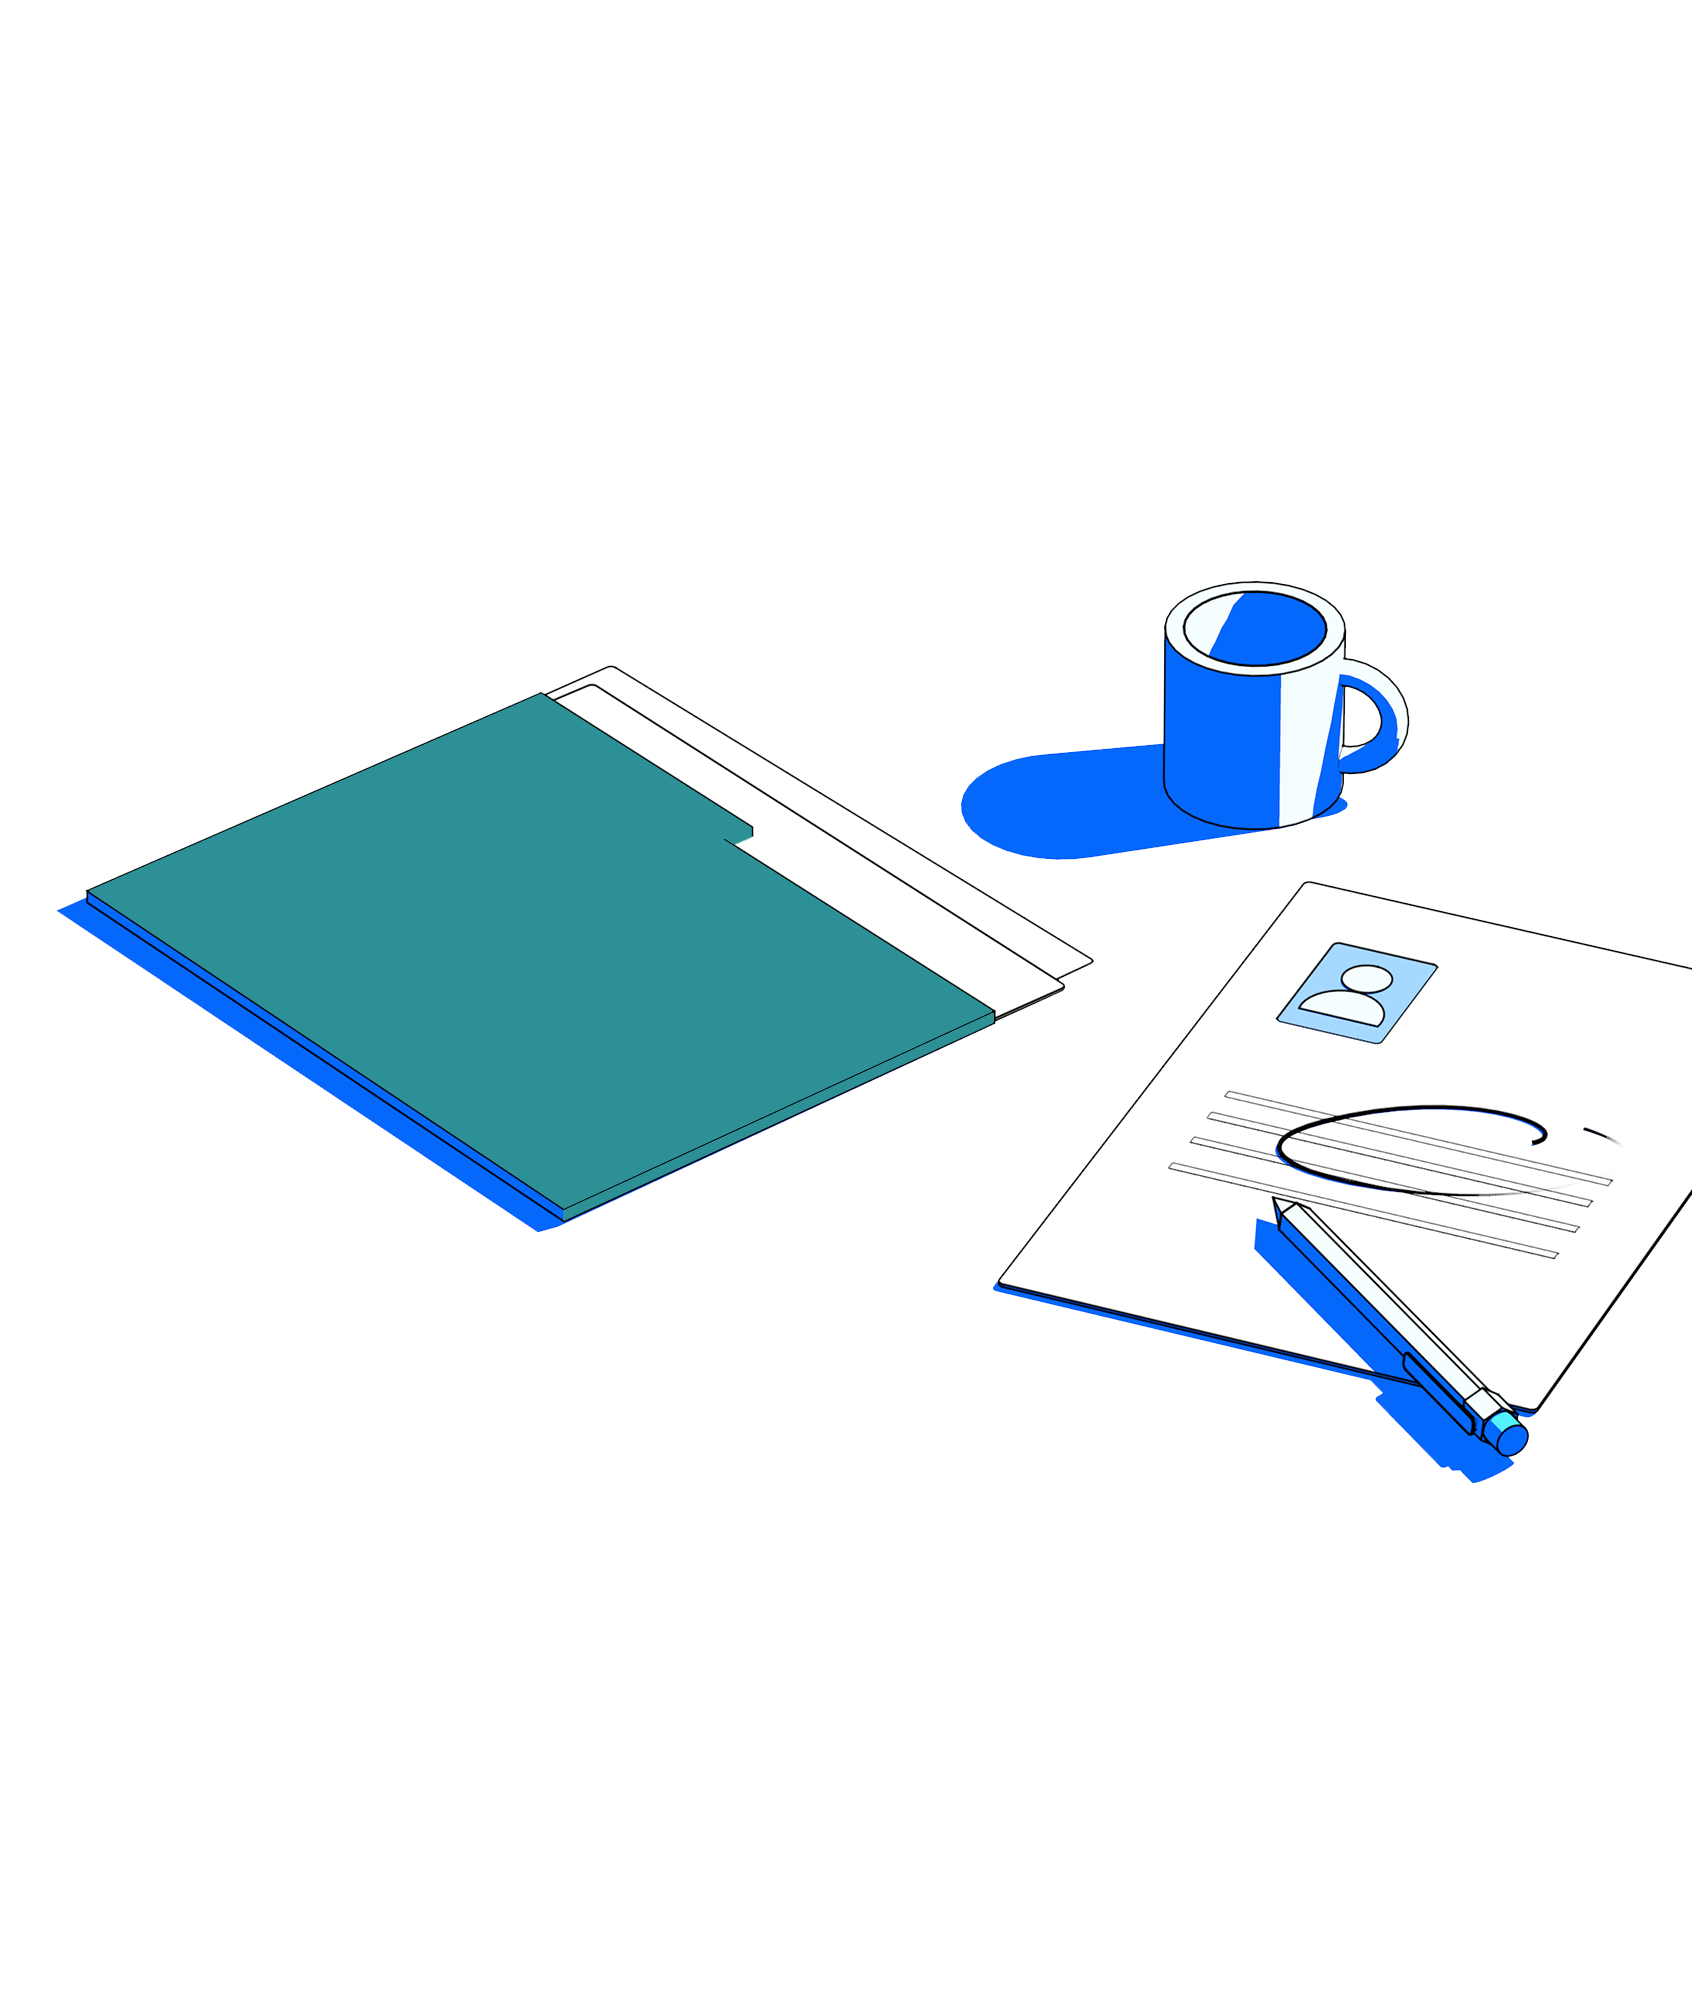 Illustration showing a folder, paper with user profile on it, and a cup